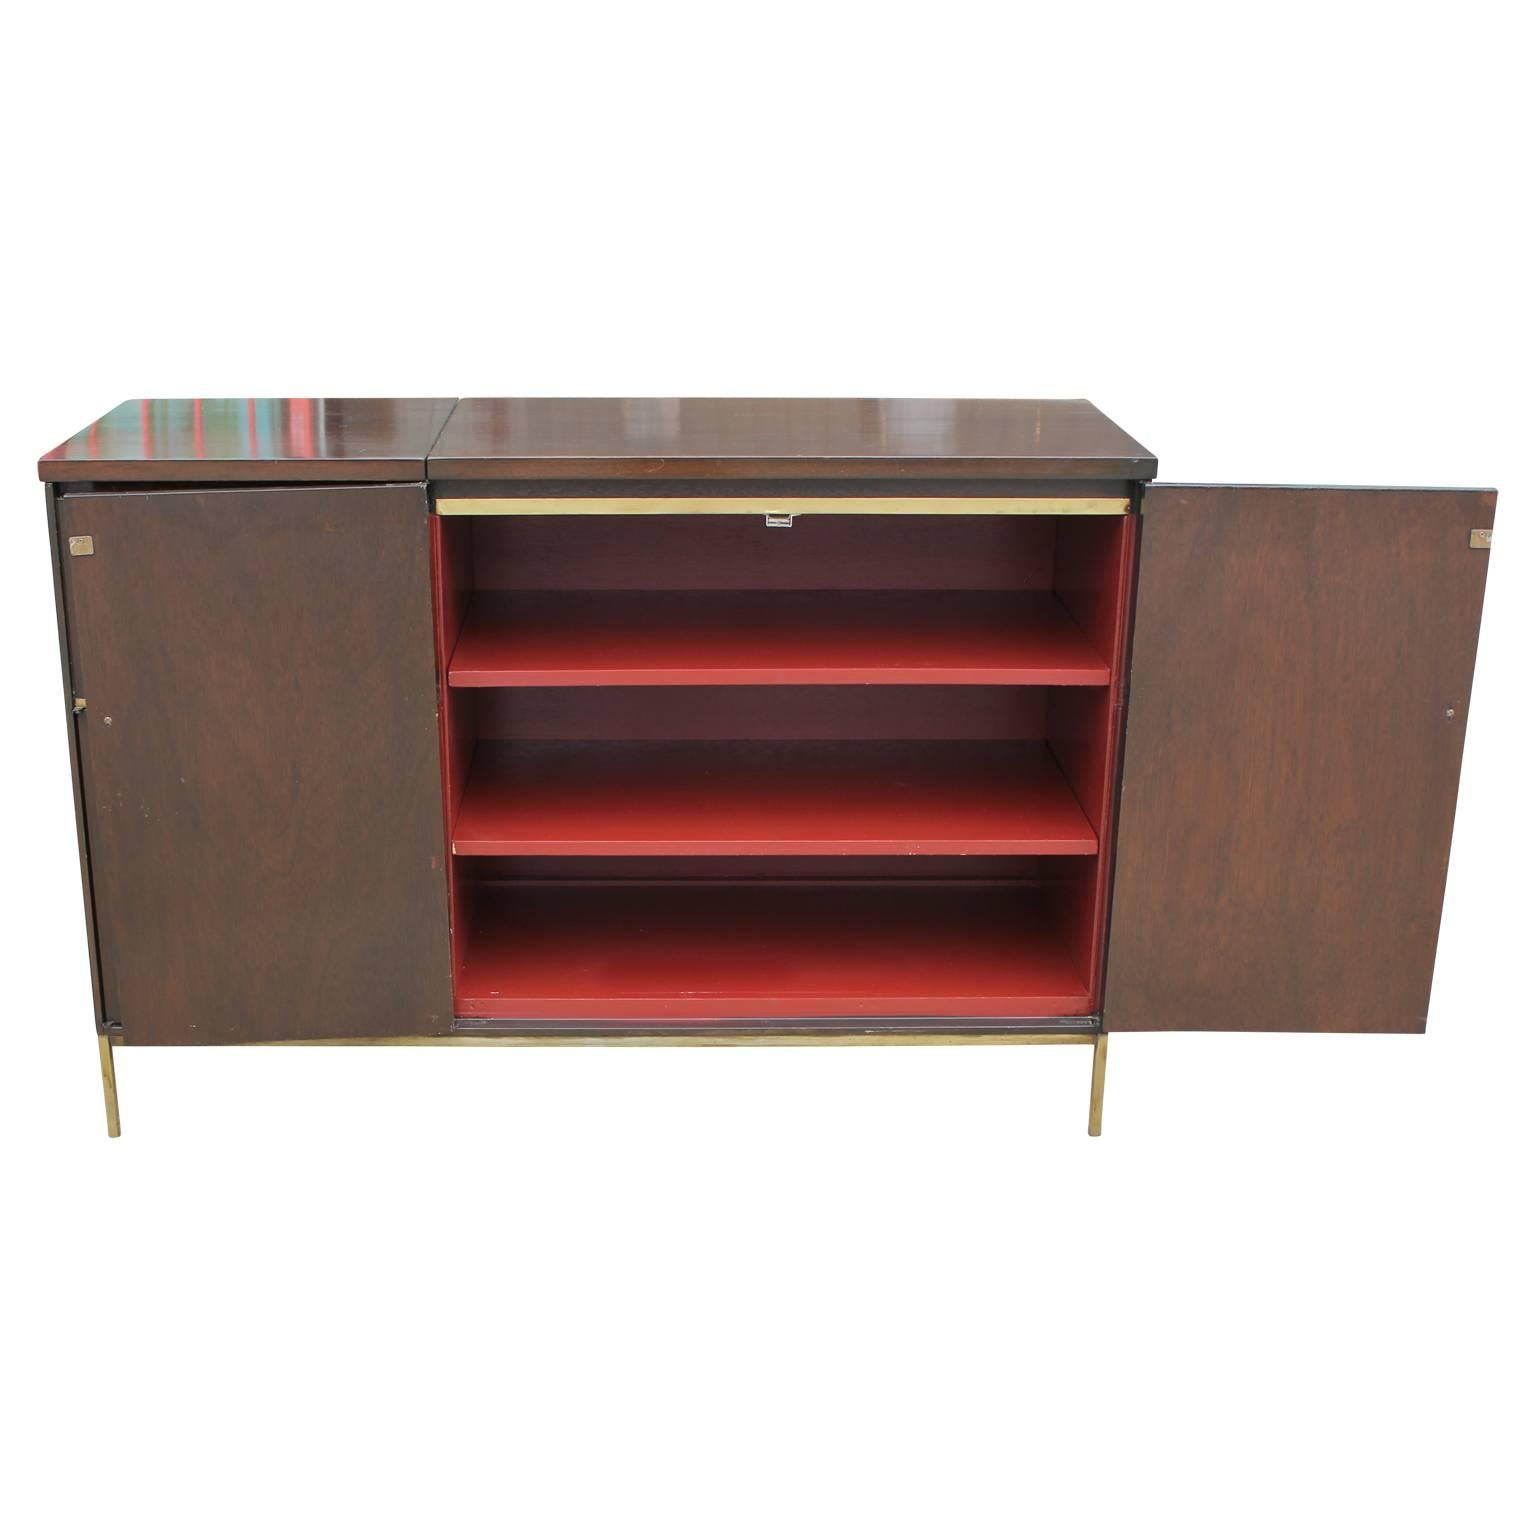 Mid-20th Century Paul McCobb Style Mid Century Modern Walnut Cabinet or Sideboard with Brass Legs